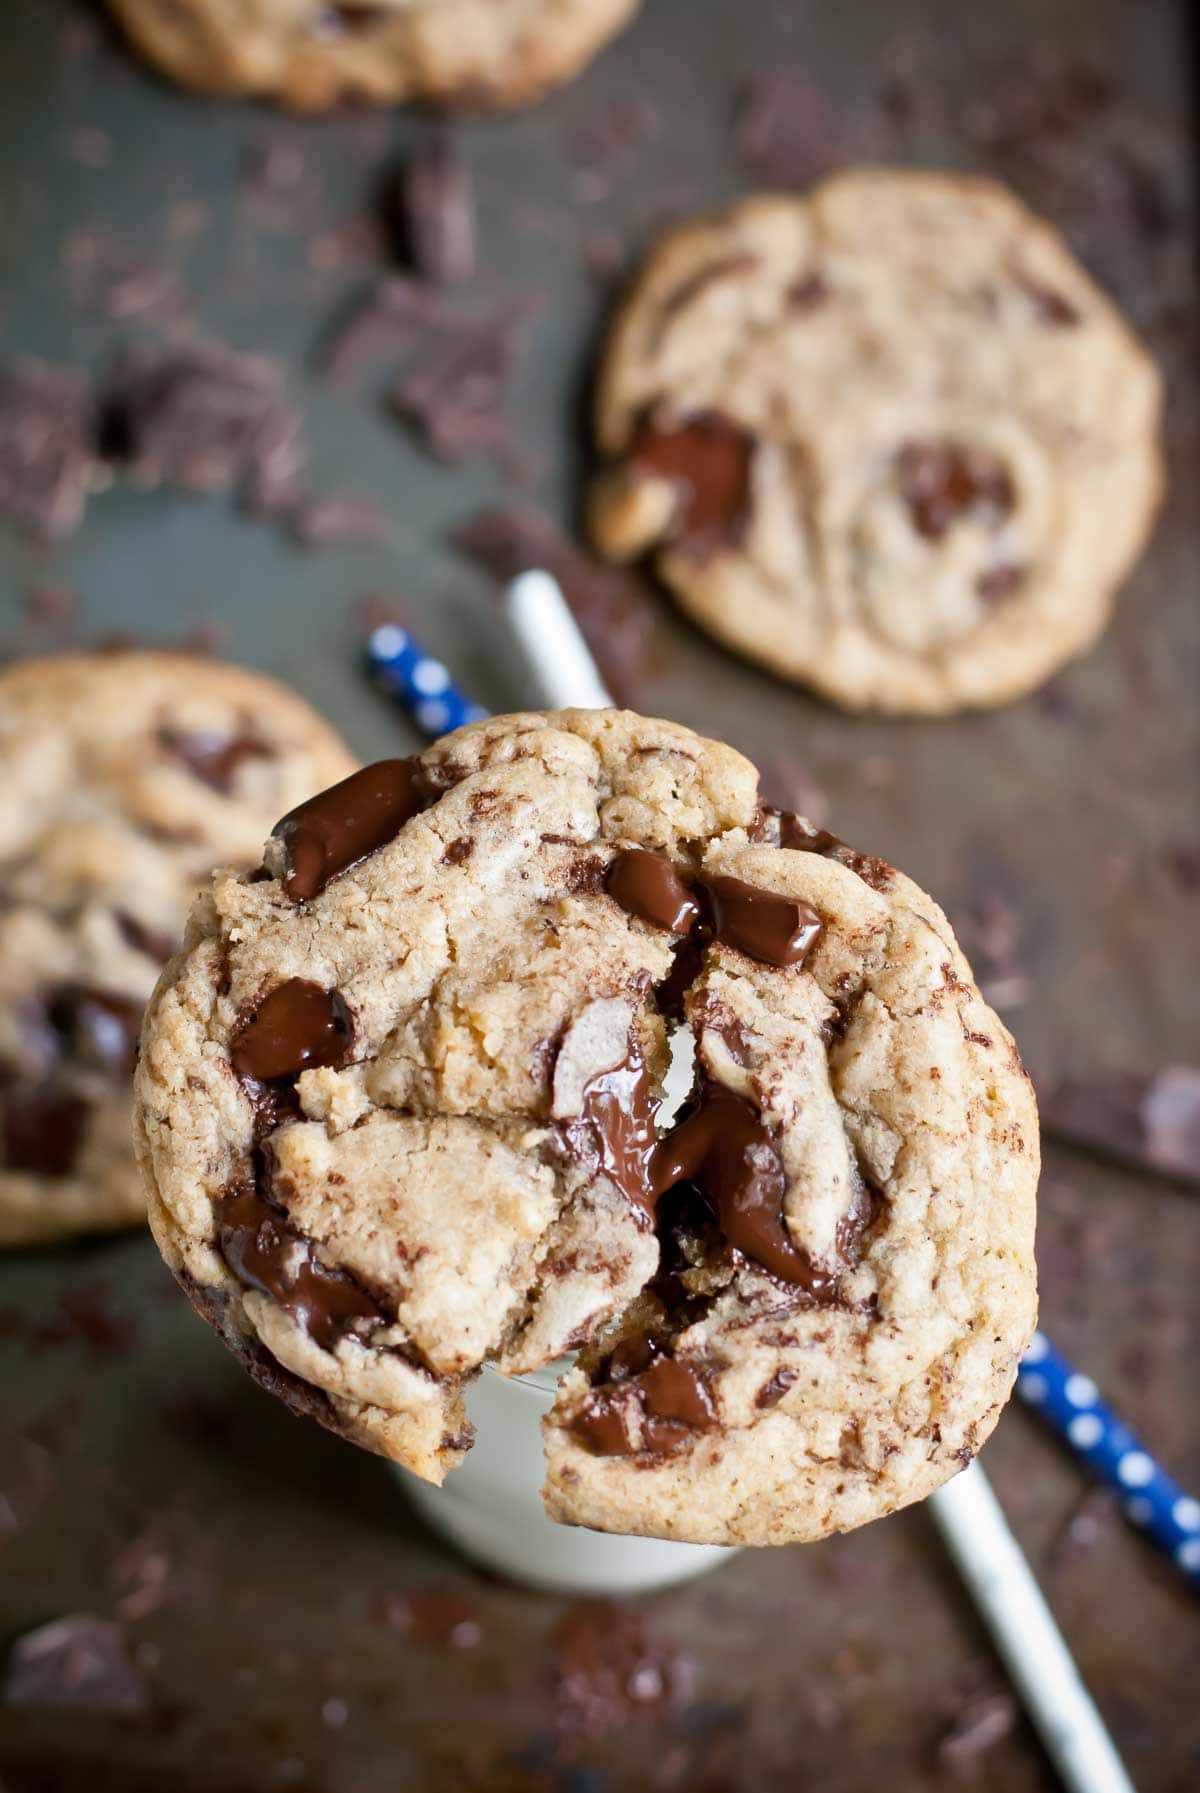 Hunks of melty dark chocolate put these Giant Bakery Style Chocolate Chunk Cookies over the edge!